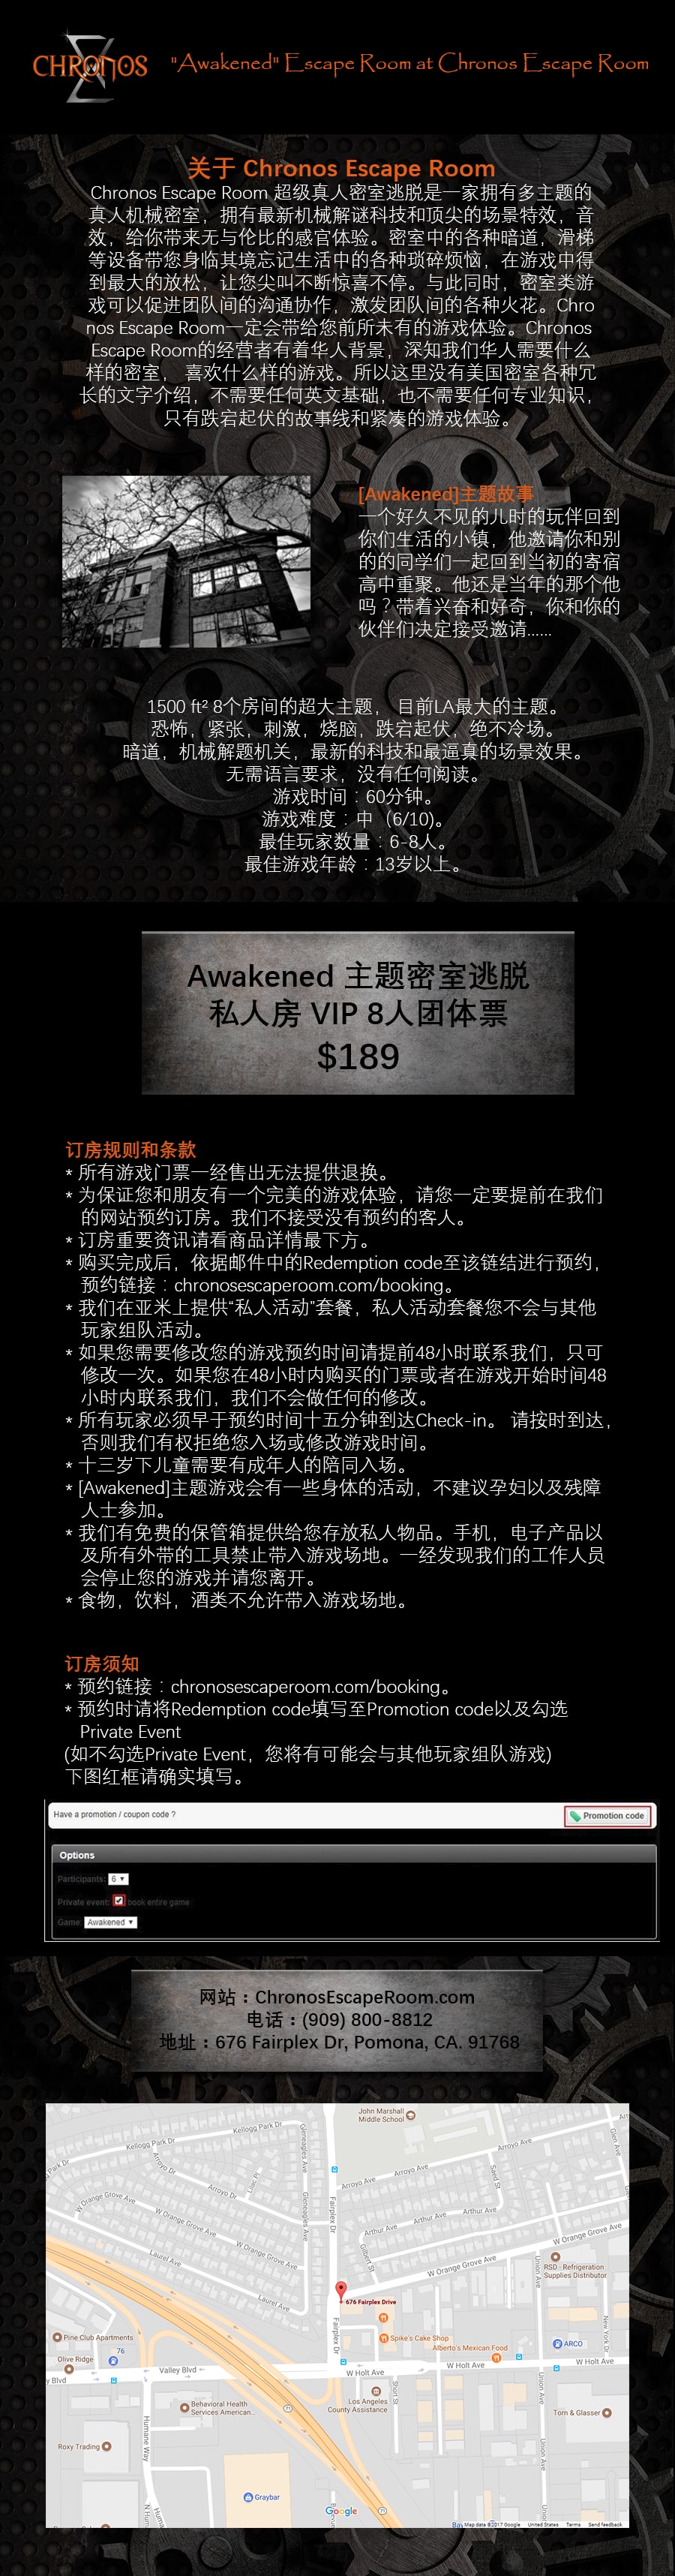 Awakened 8 People Private VIP Game at Chronos Escape Room